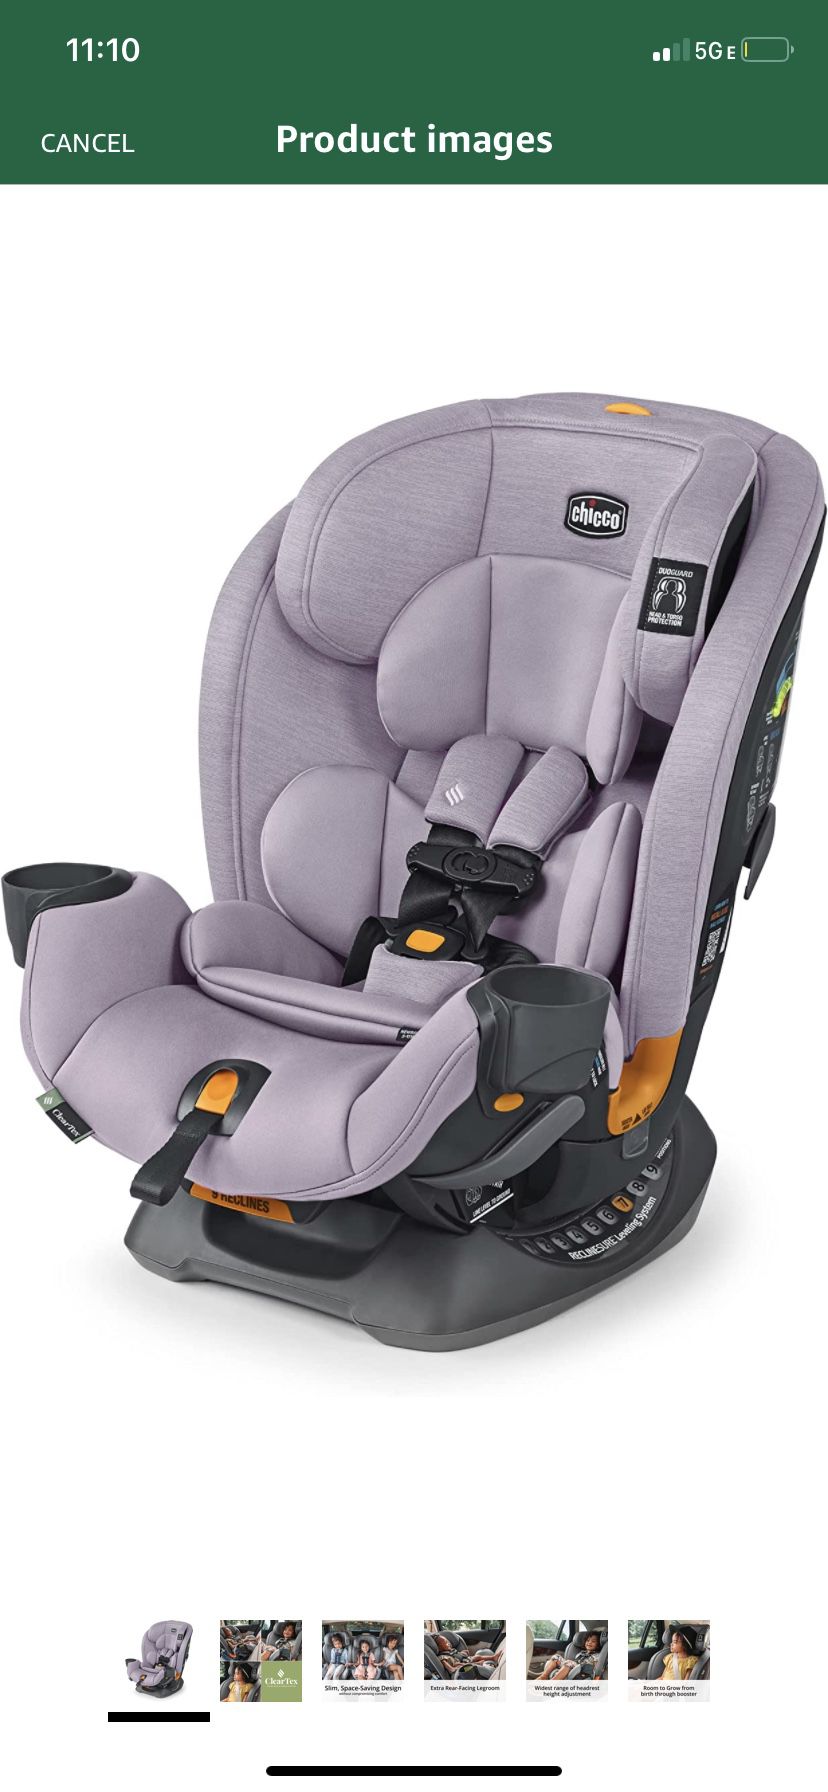 All-in-One Car Seat, Rear-Facing Seat for Infants 5-40 lbs